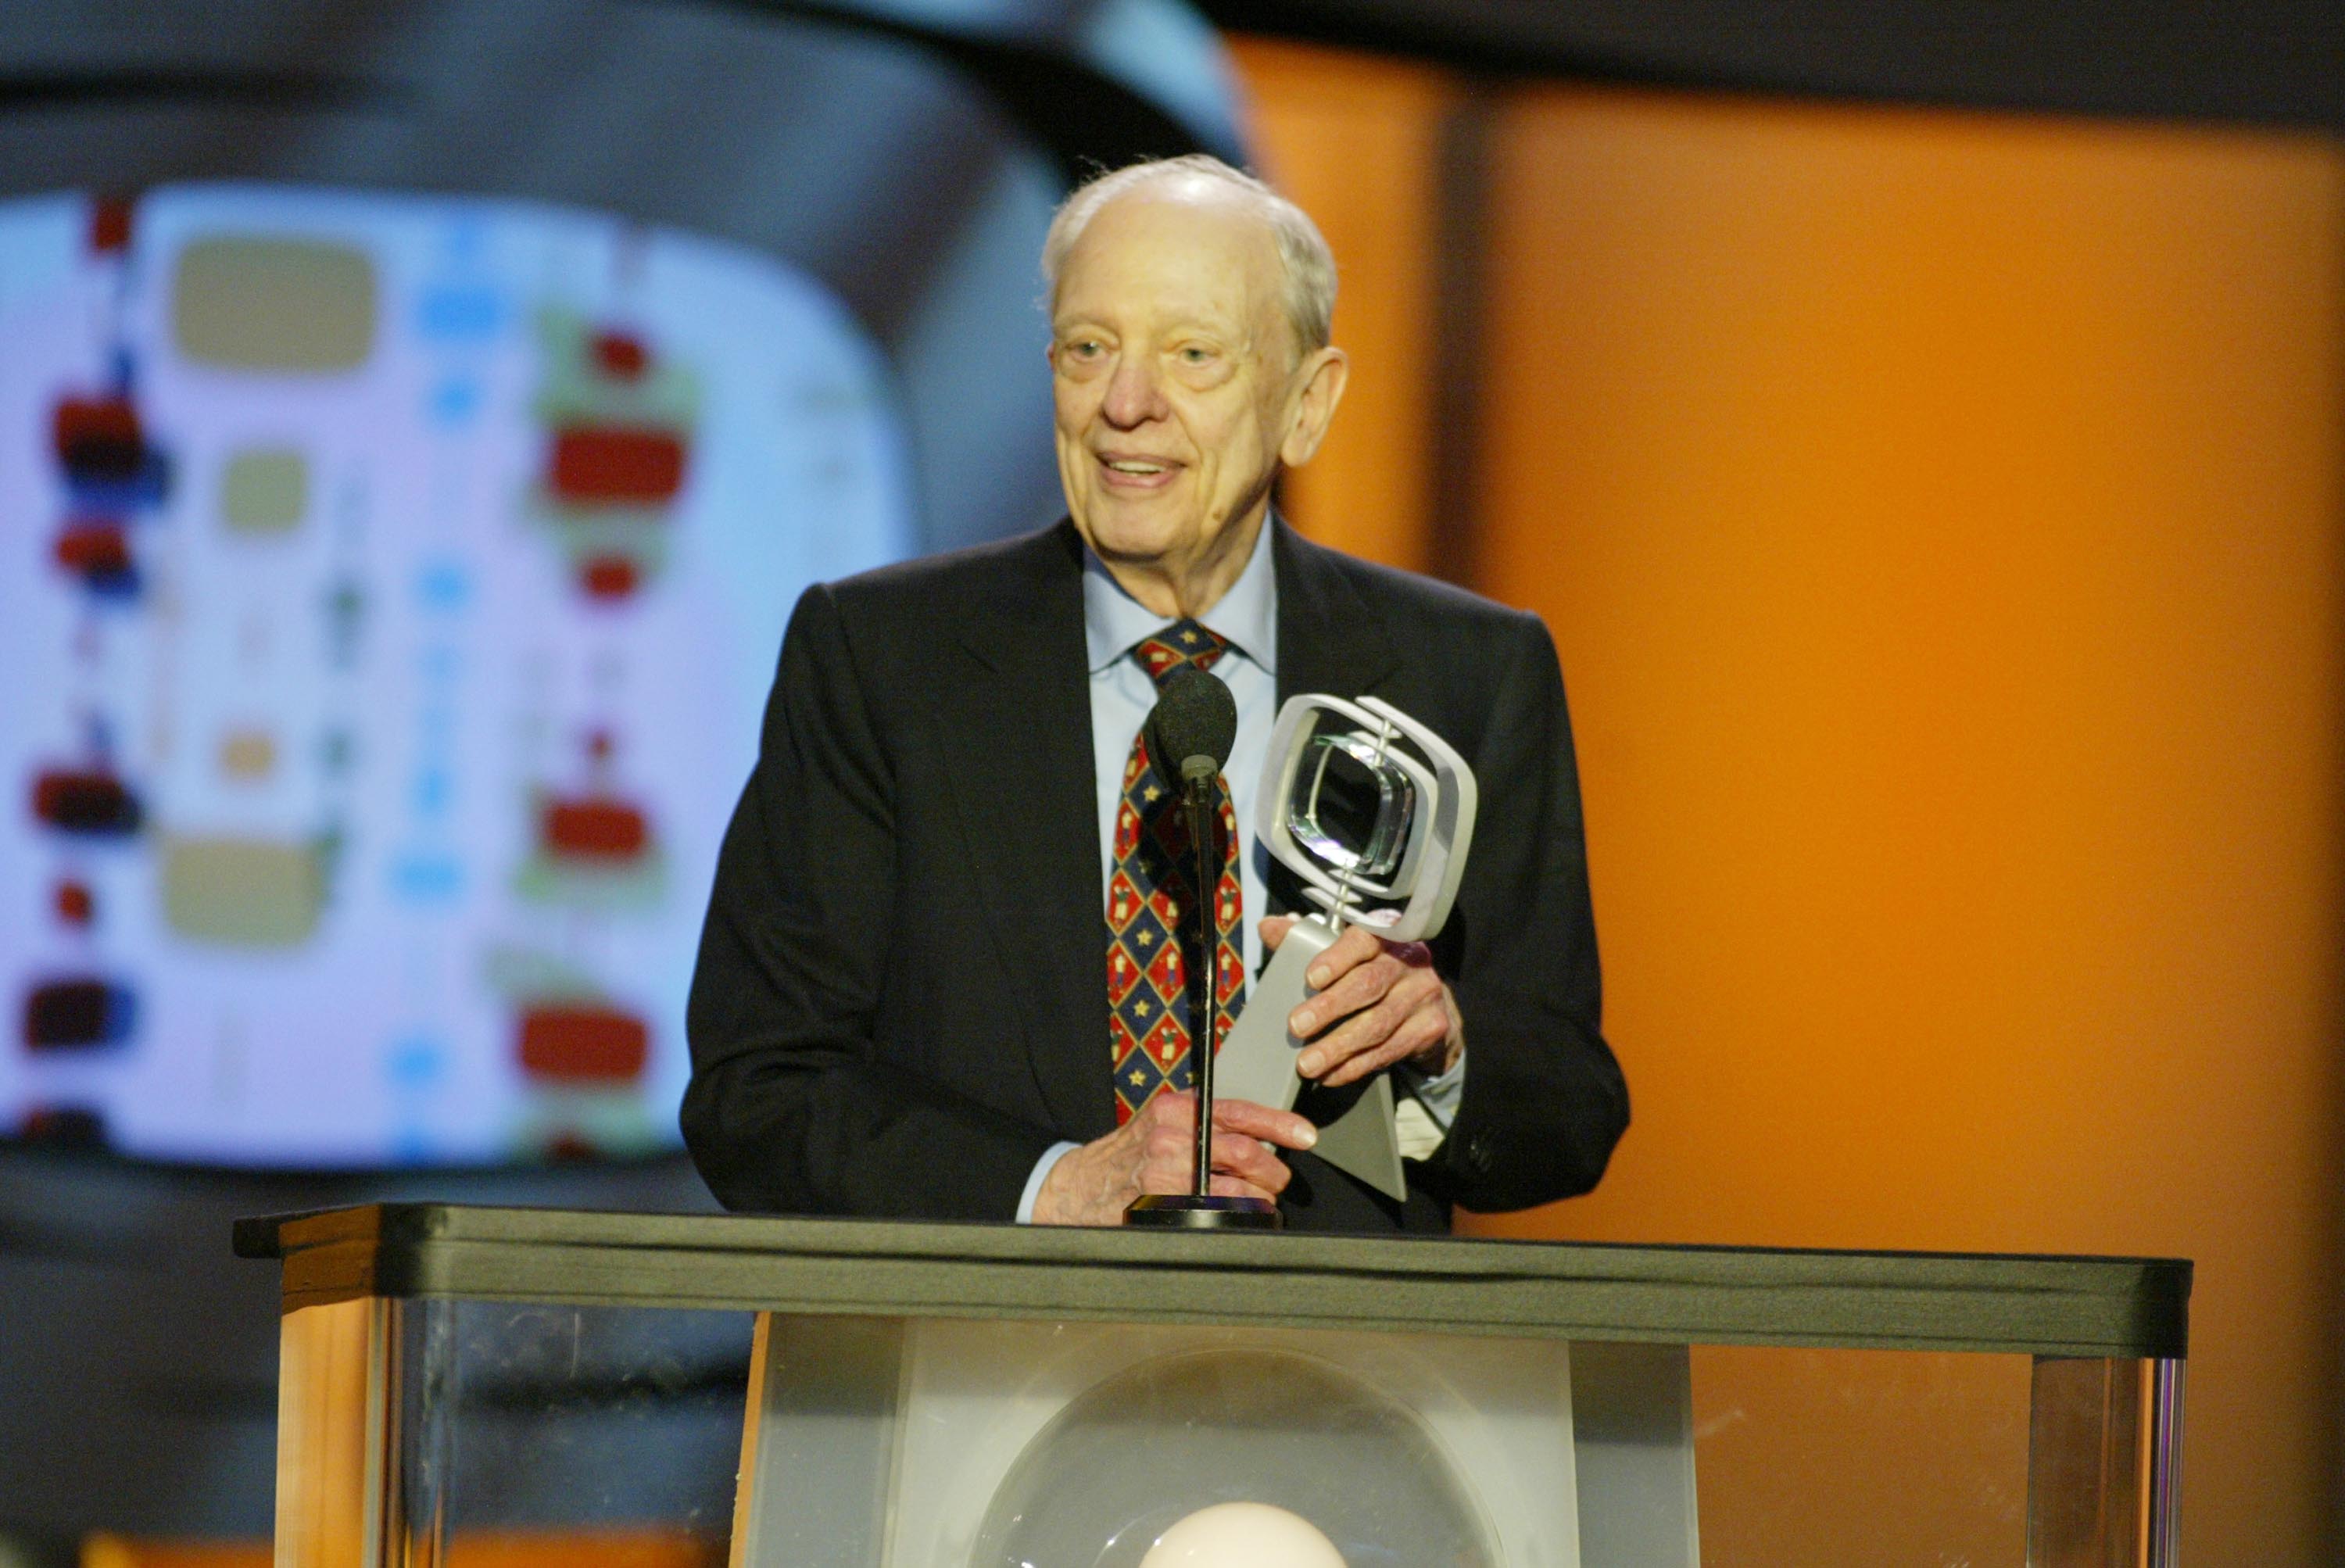 Don Knotts, who died in 2006, holds an award in 2003.